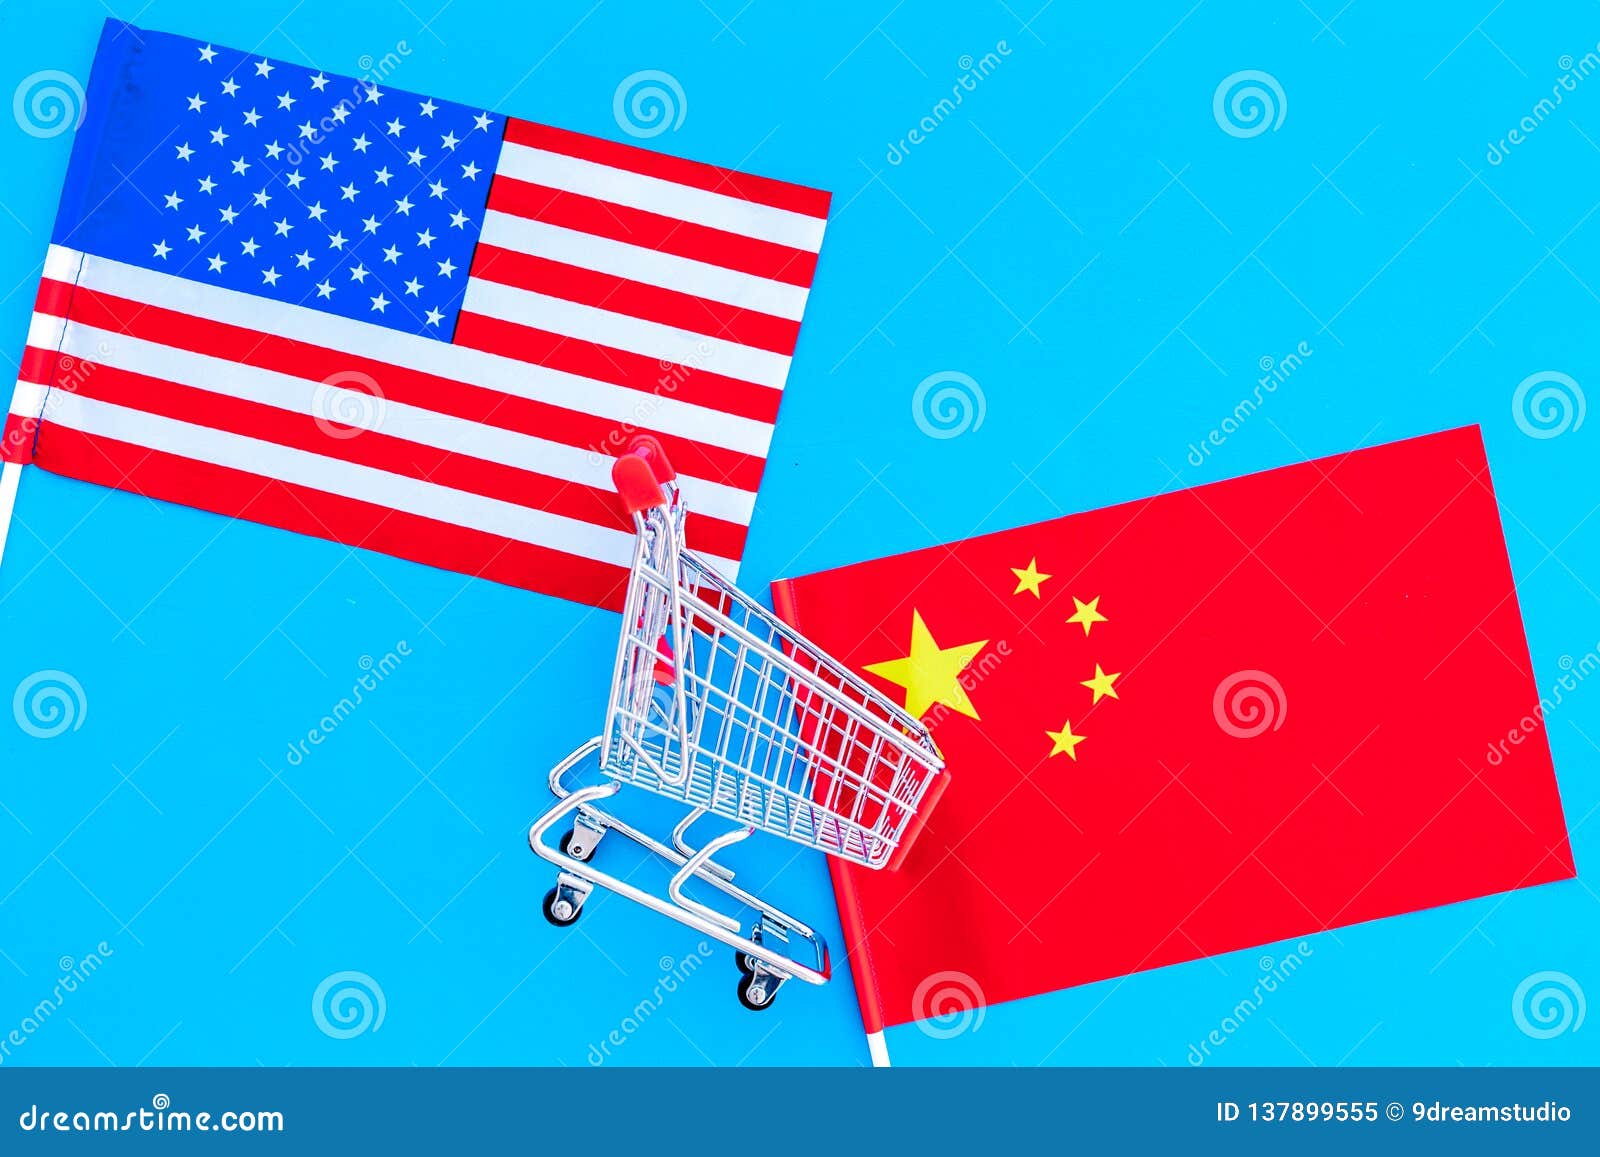 USA And China Trade War. American And Chinese Flags Near ...